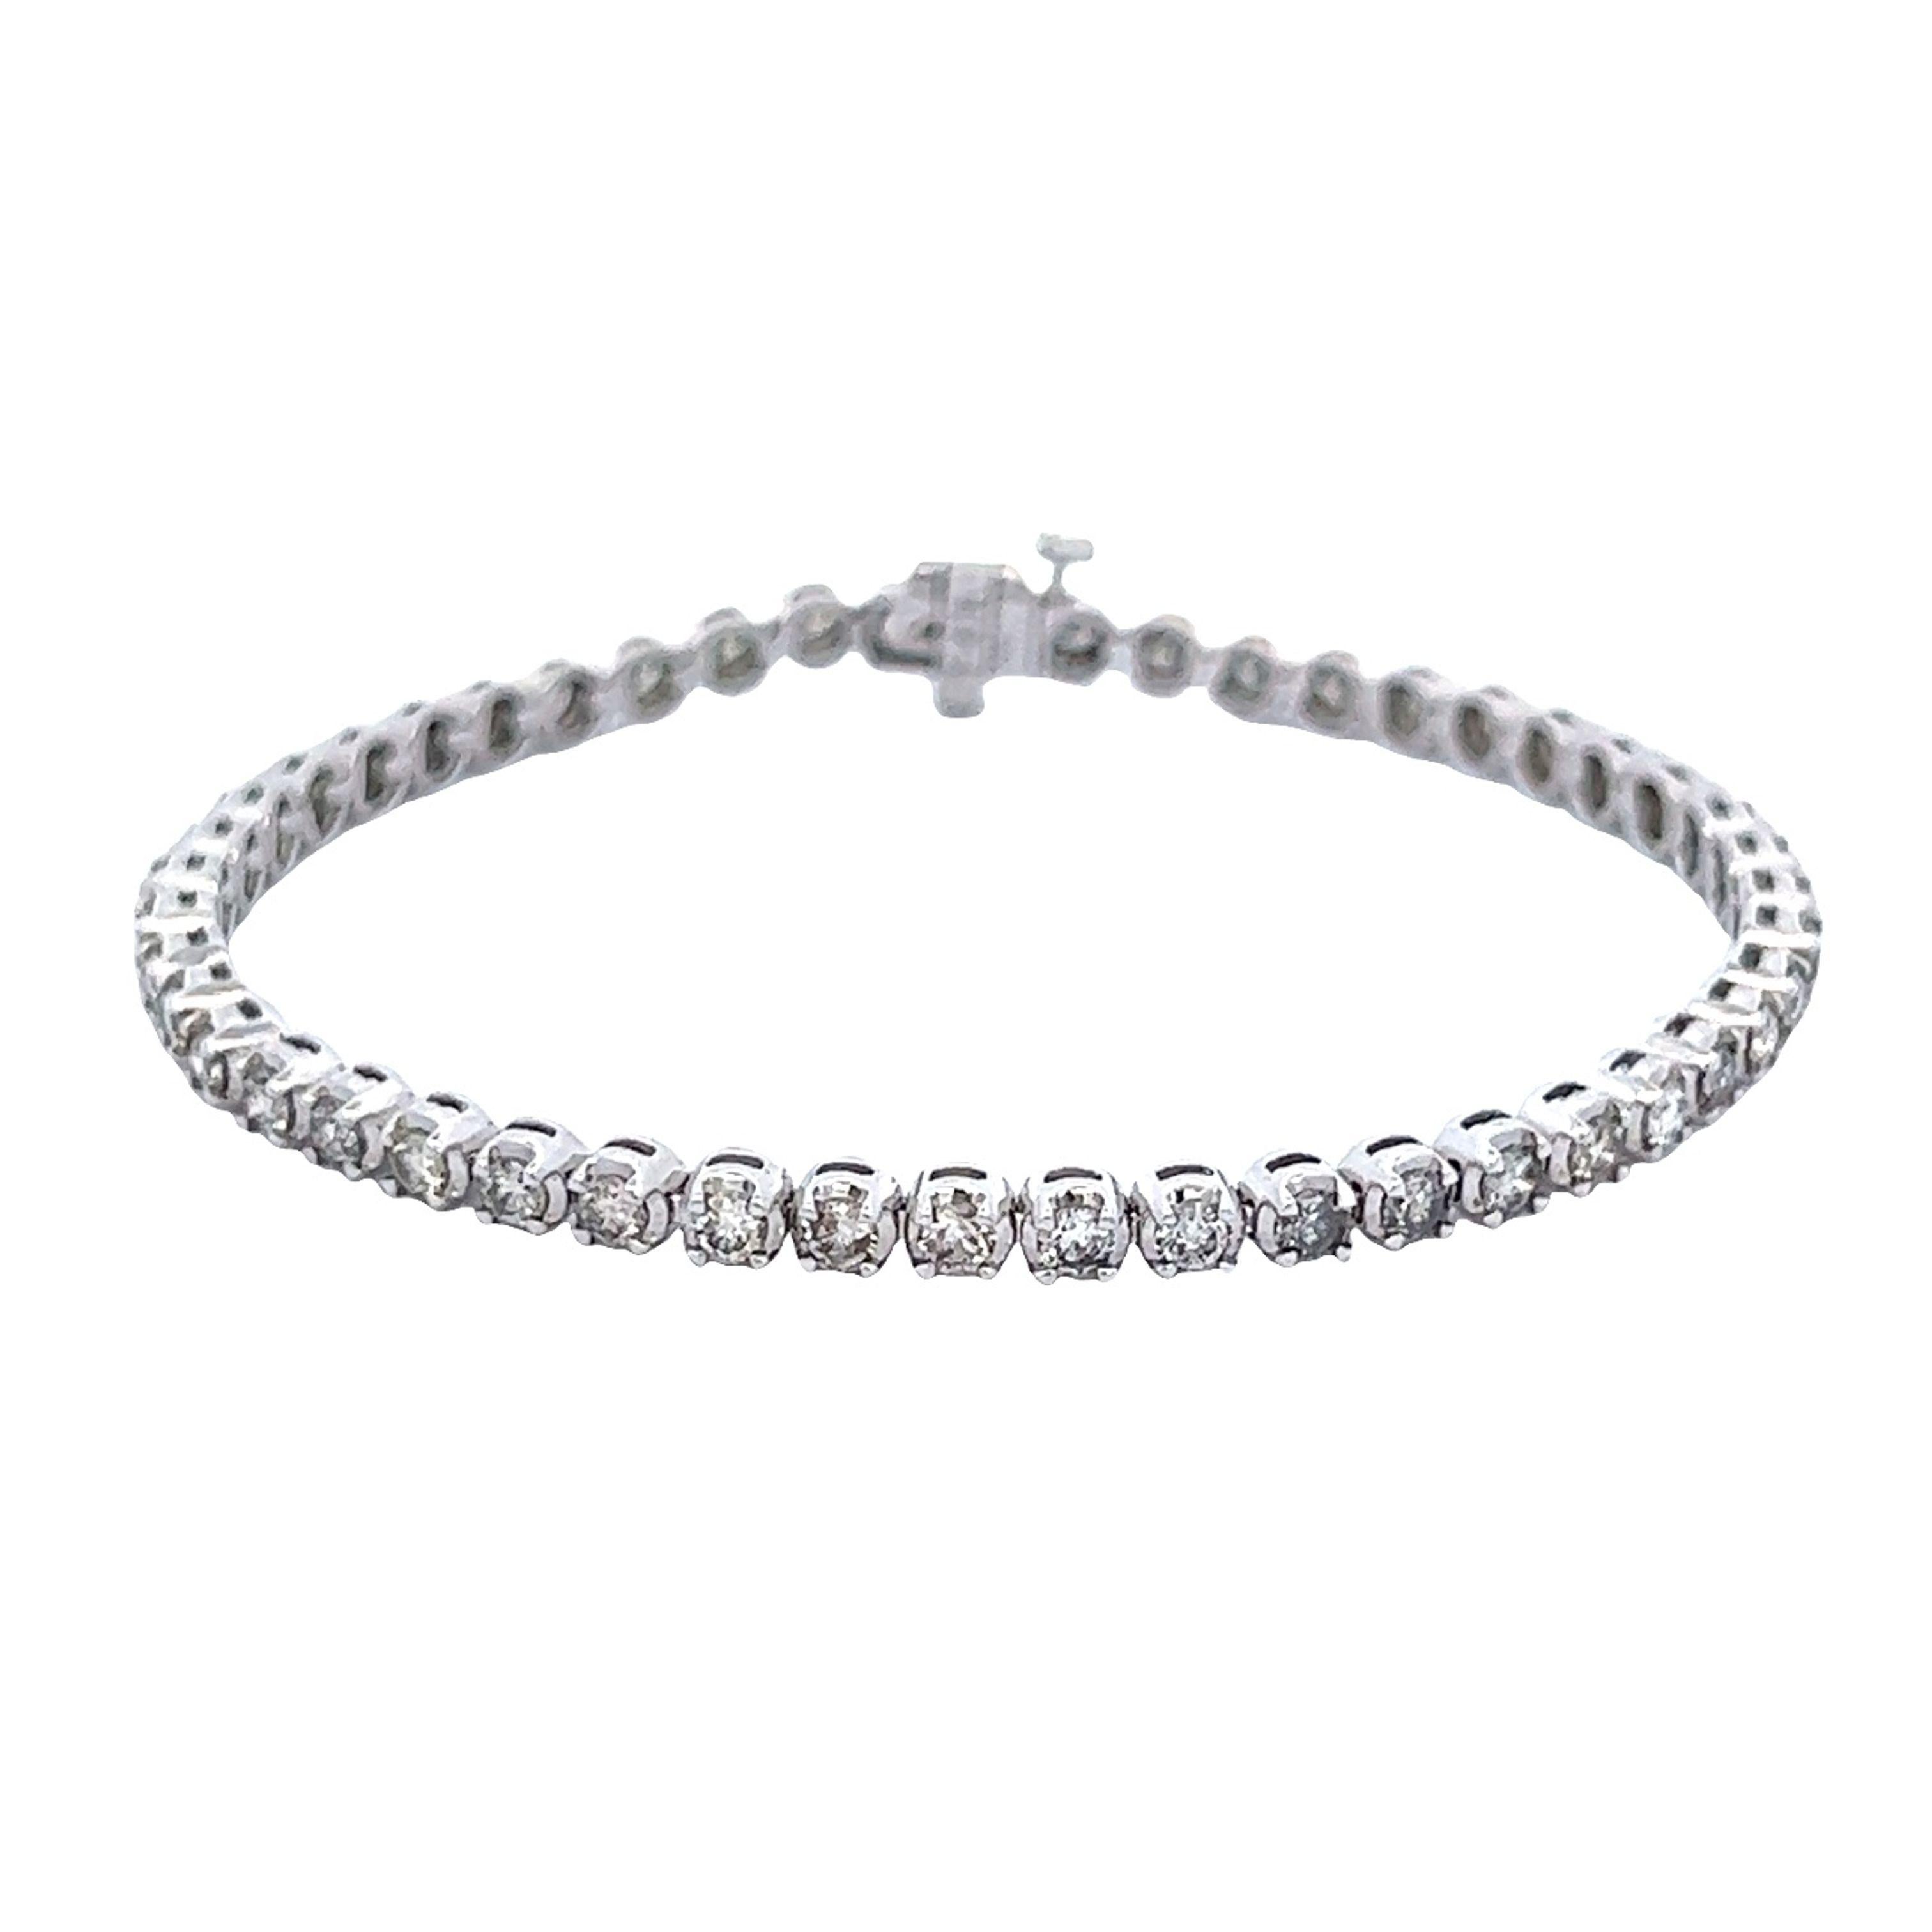 Exquisite and timeless diamonds tennis bracelet, by Alexander Beverly Hills.
48 round brilliant diamonds, 3.15 carats. Approximately I/J color and SI clarity. Four prong set in 14k white gold, 9.16 grams, 7 inches. 
Accommodated with an up-to-date